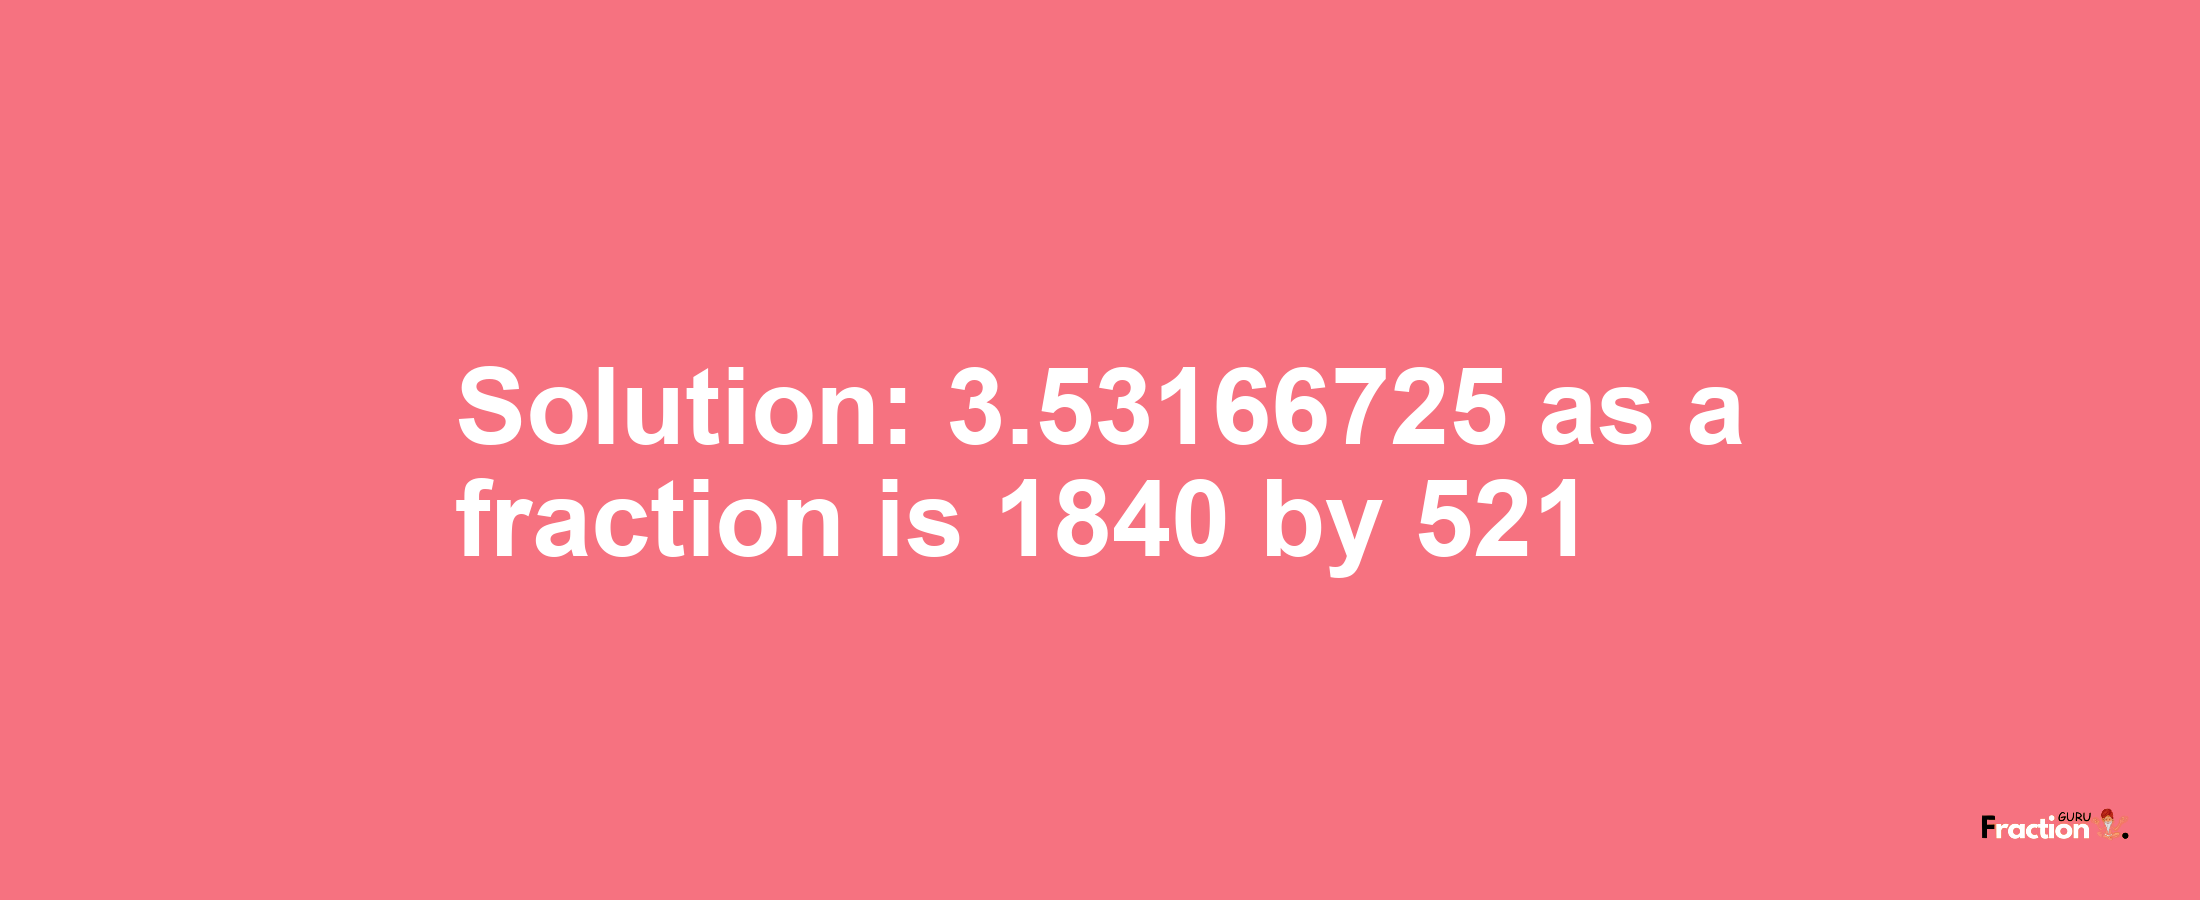 Solution:3.53166725 as a fraction is 1840/521